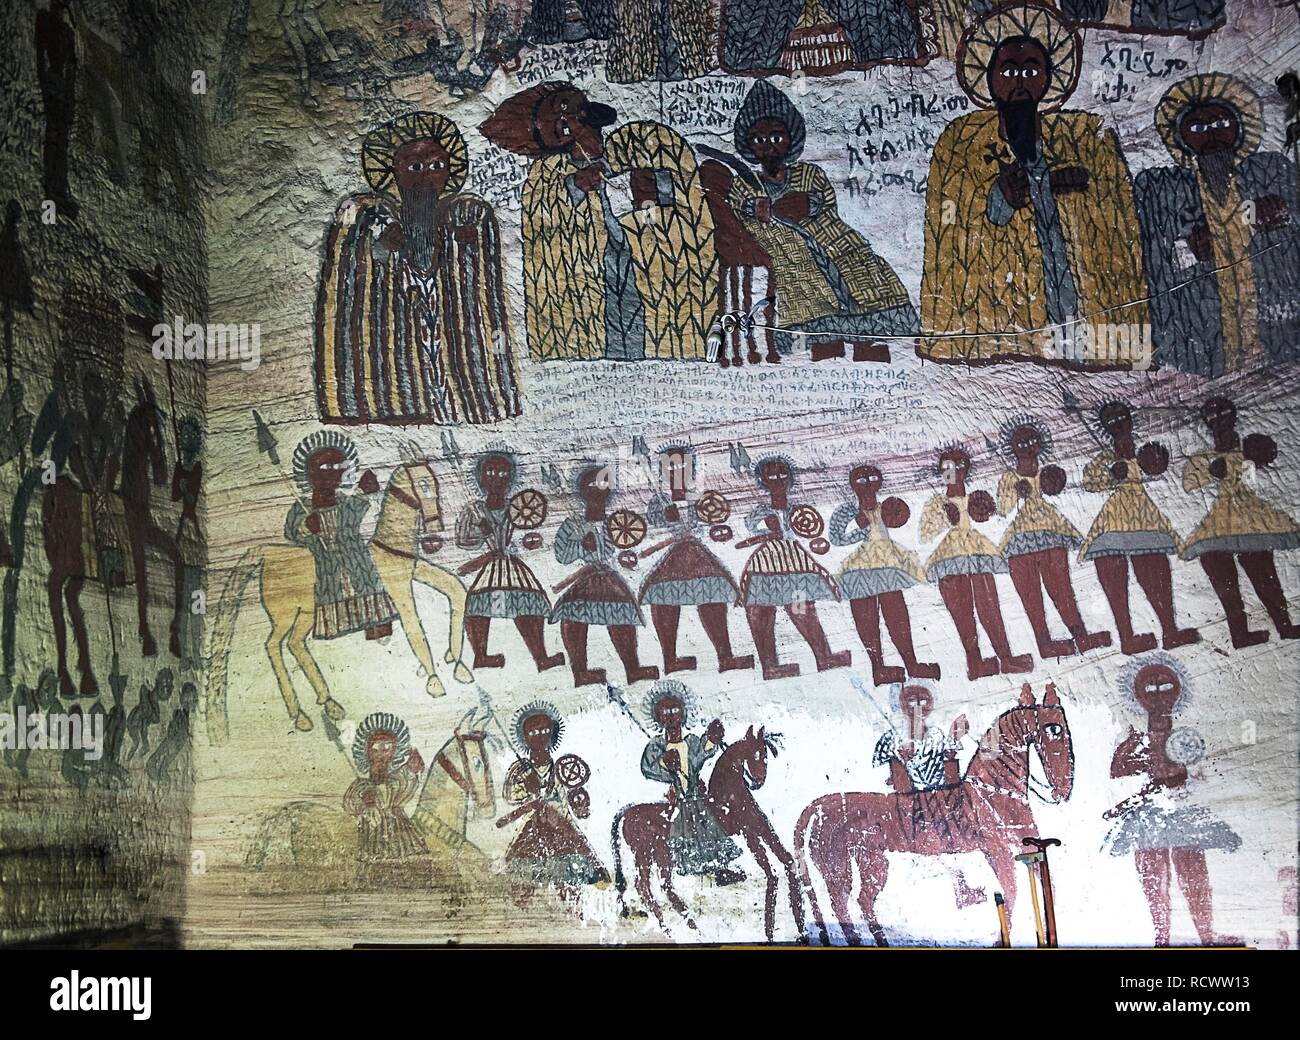 Historical wall painting in the rock church Yohannes Maequddi, depictions from church history, orthodox rock church Yohannes Stock Photo